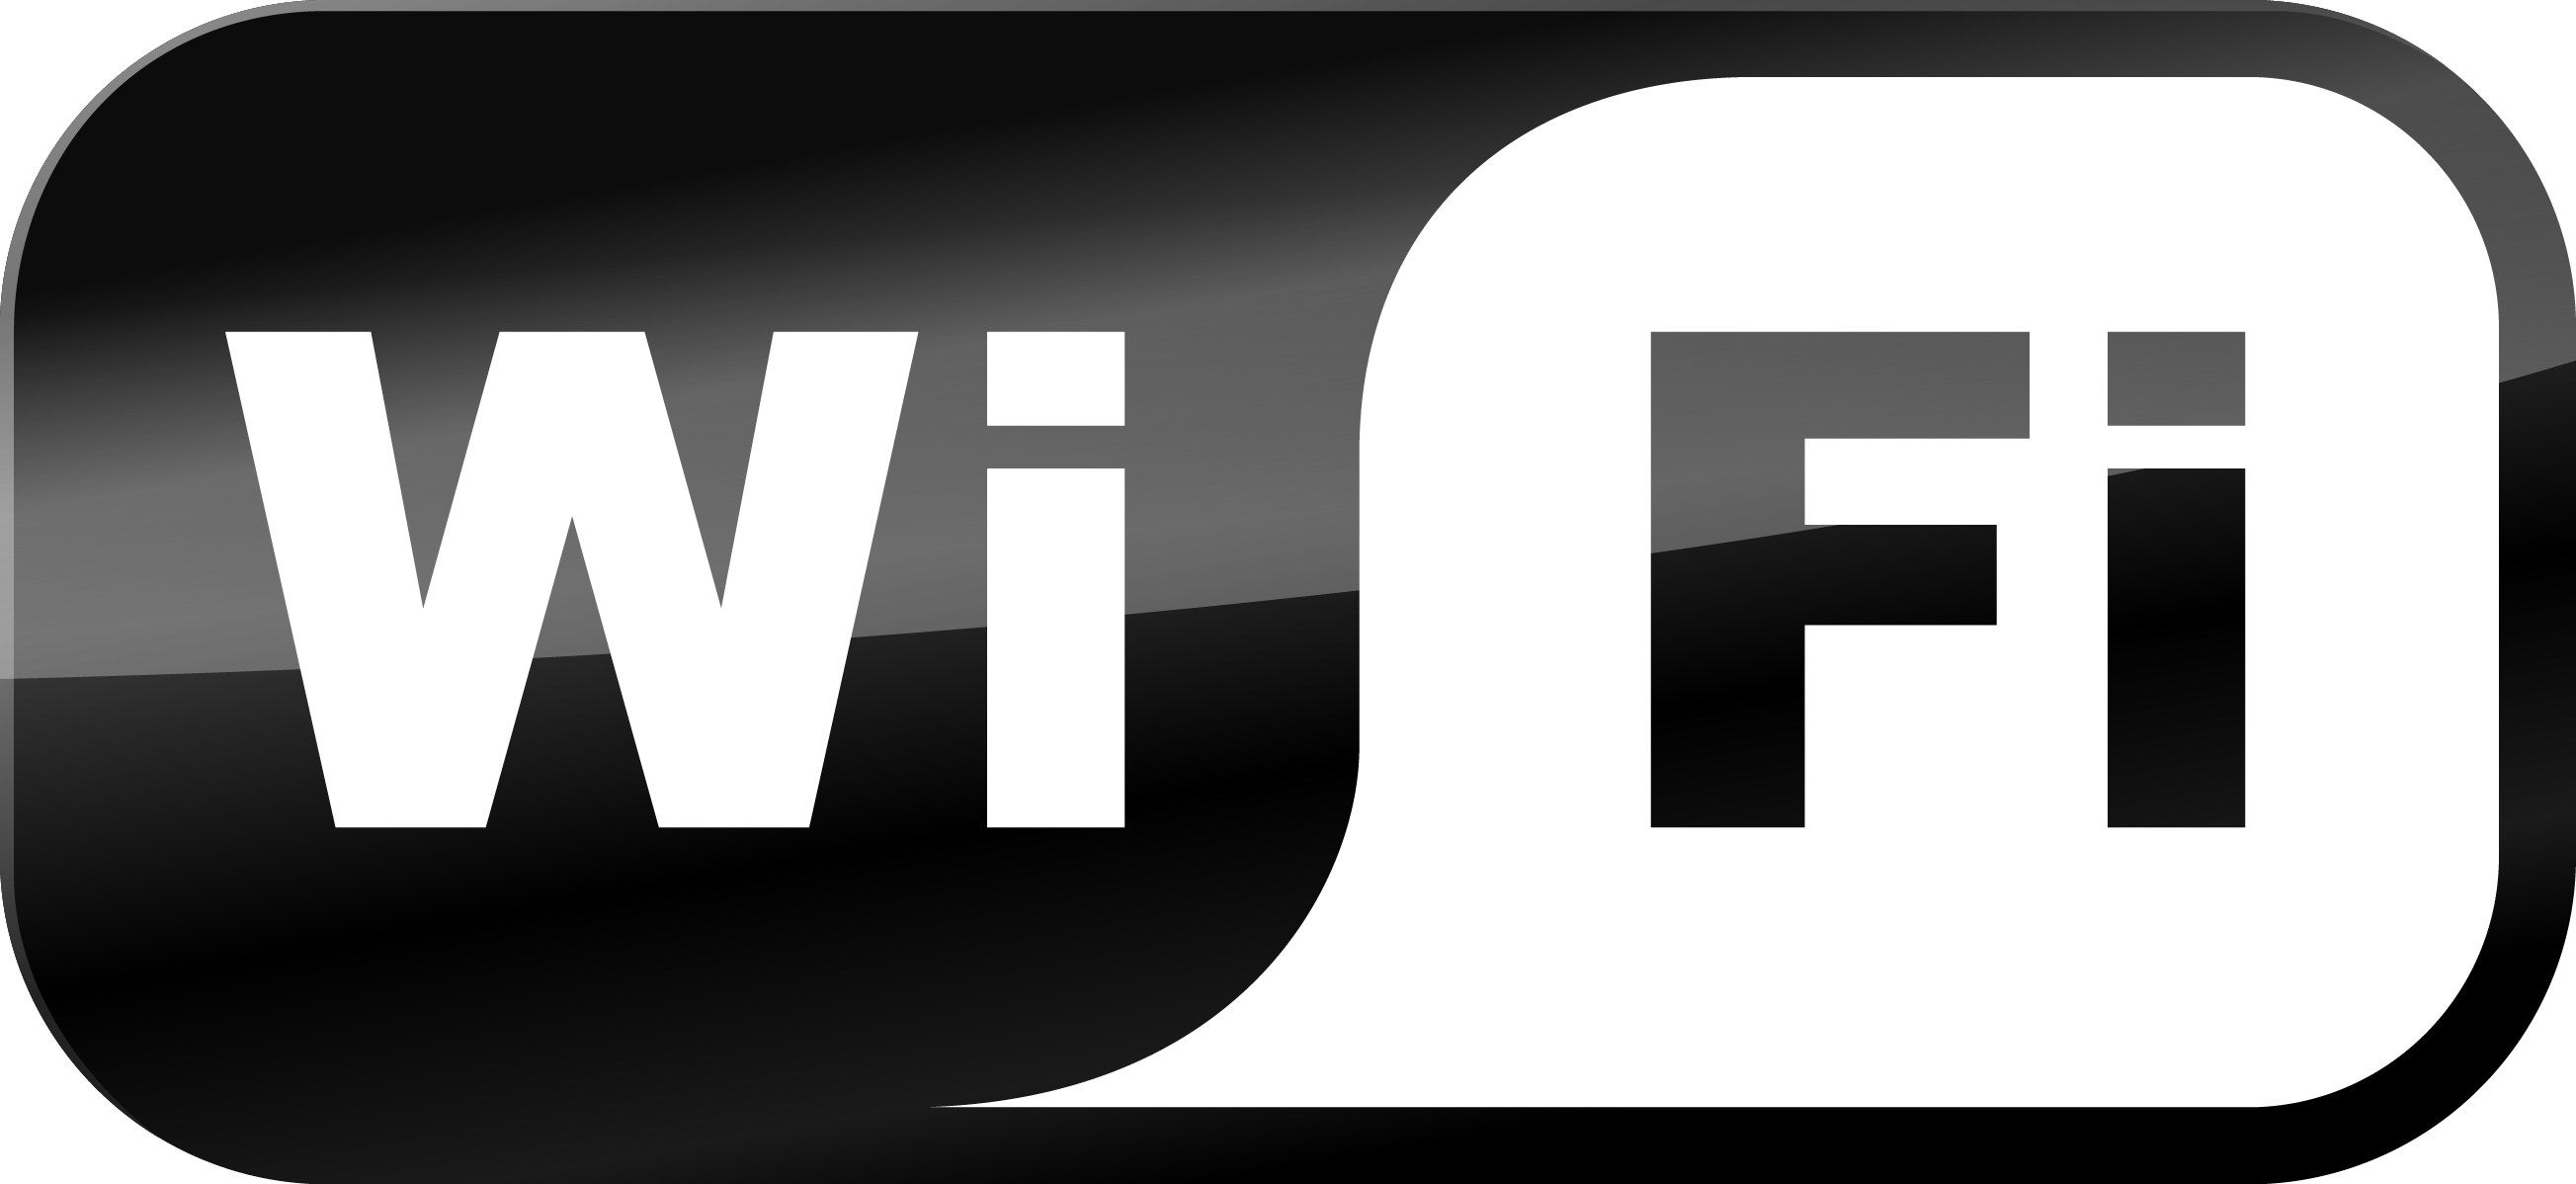 Download Repeater Wifi Wireless Vector Logo Router Wi-Fi HQ PNG Image | FreePNGImg